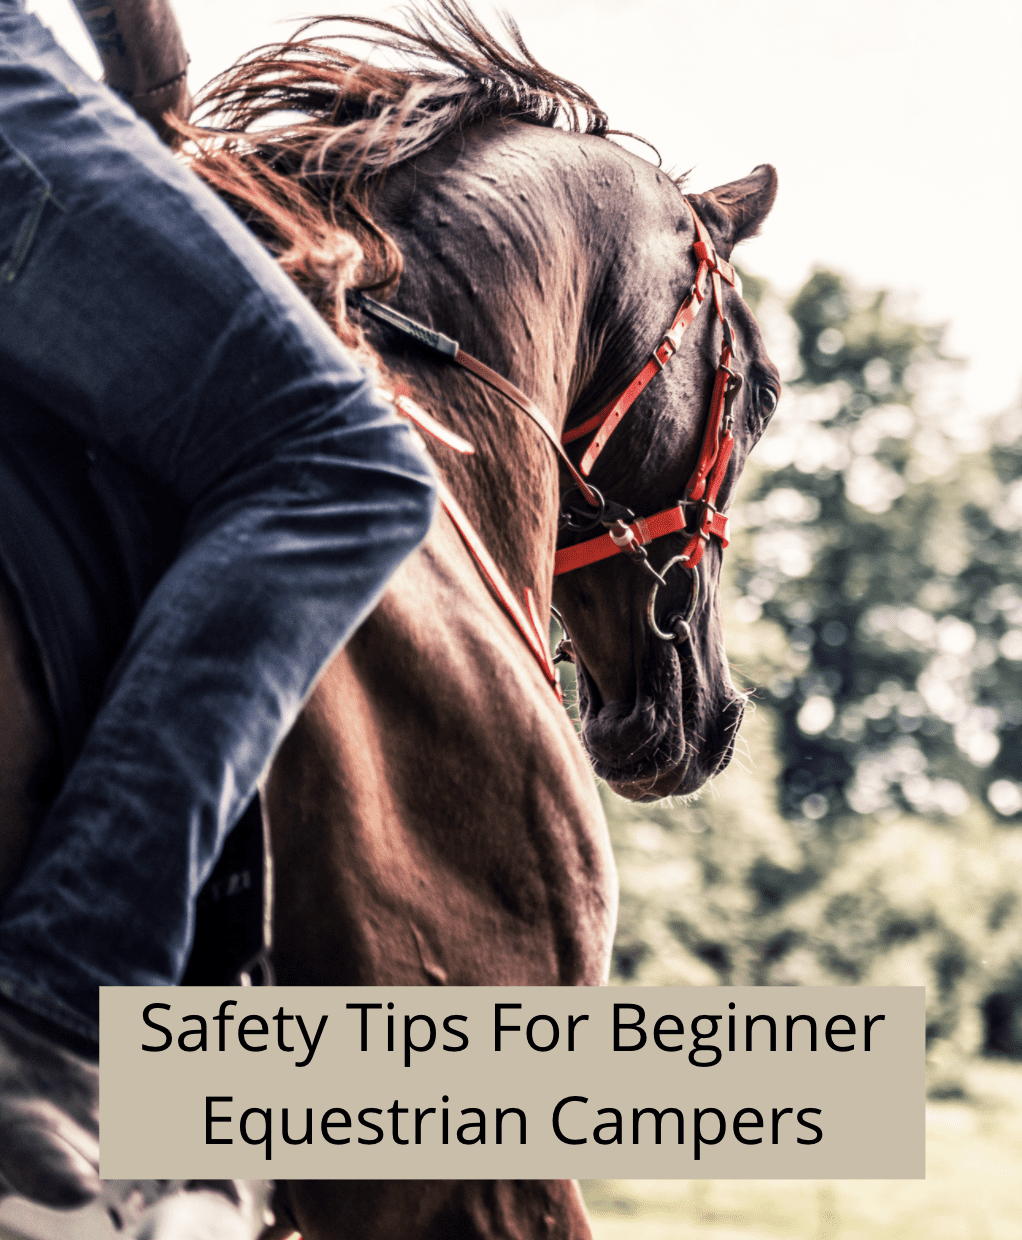 Safety Tips For Beginner Equestrian Campers